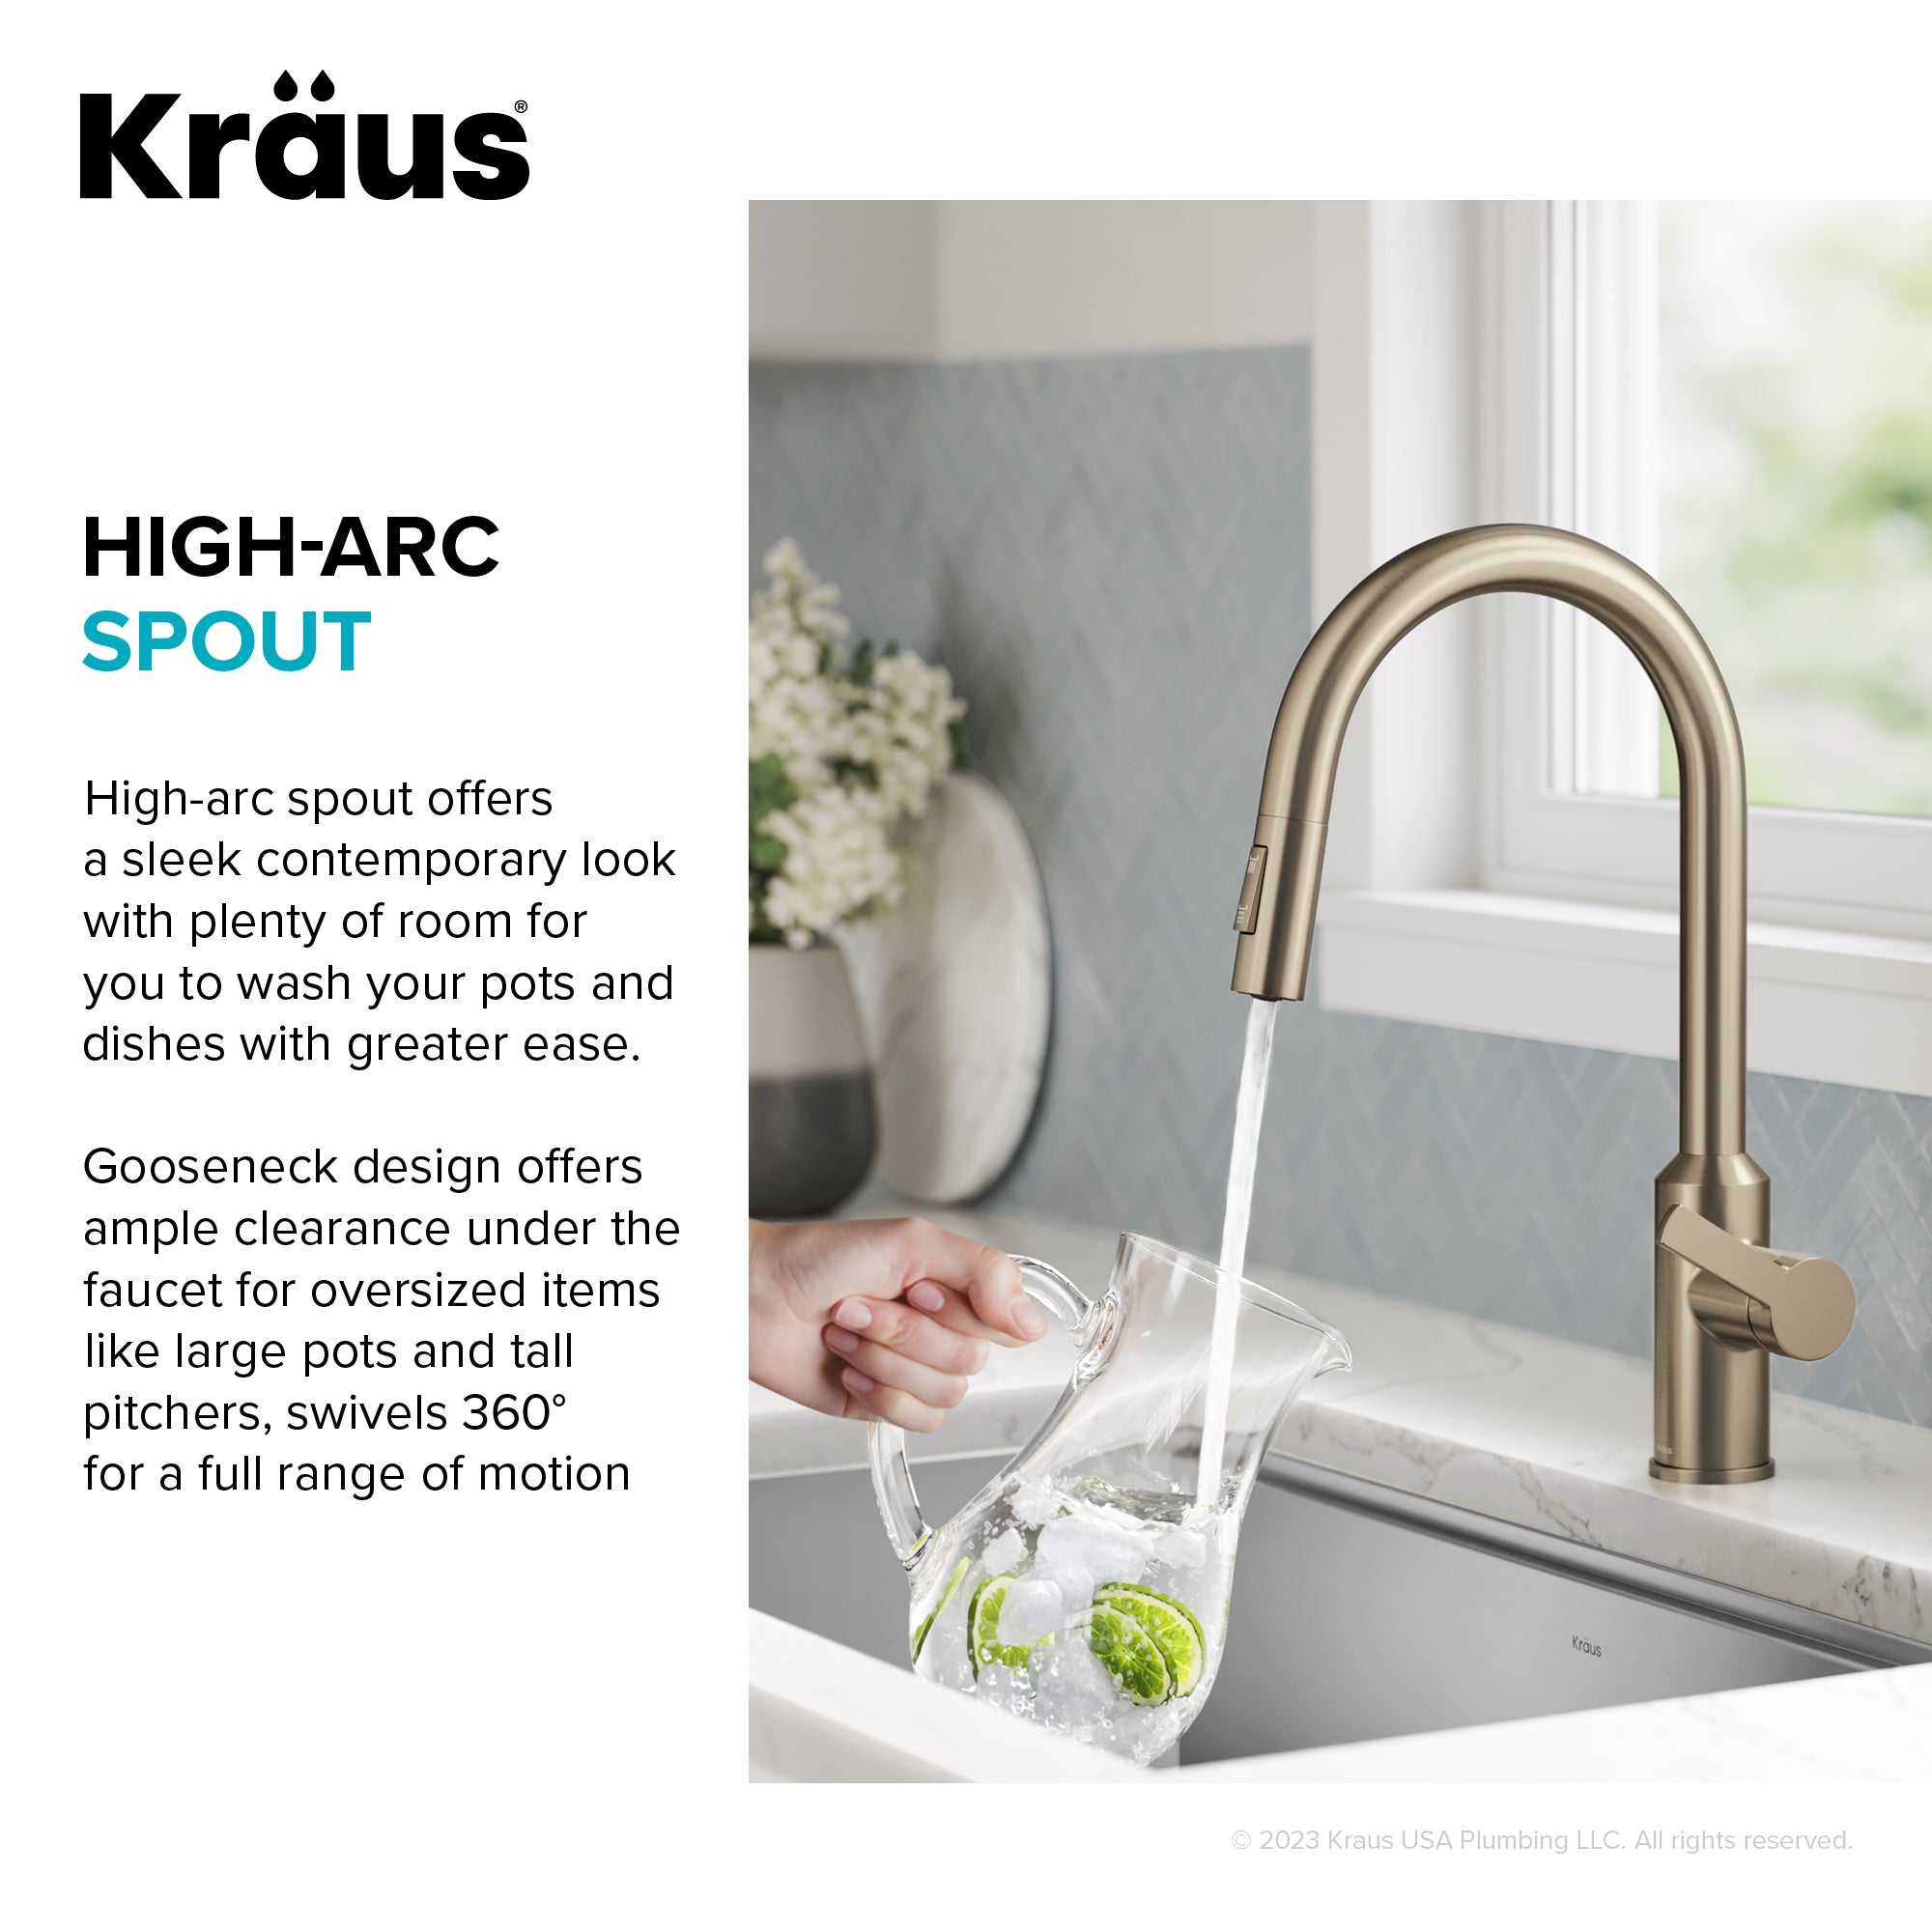 KRAUS Oletto Touchless Pull-Down Kitchen Faucet in Spot-Free Antique Champagne Bronze